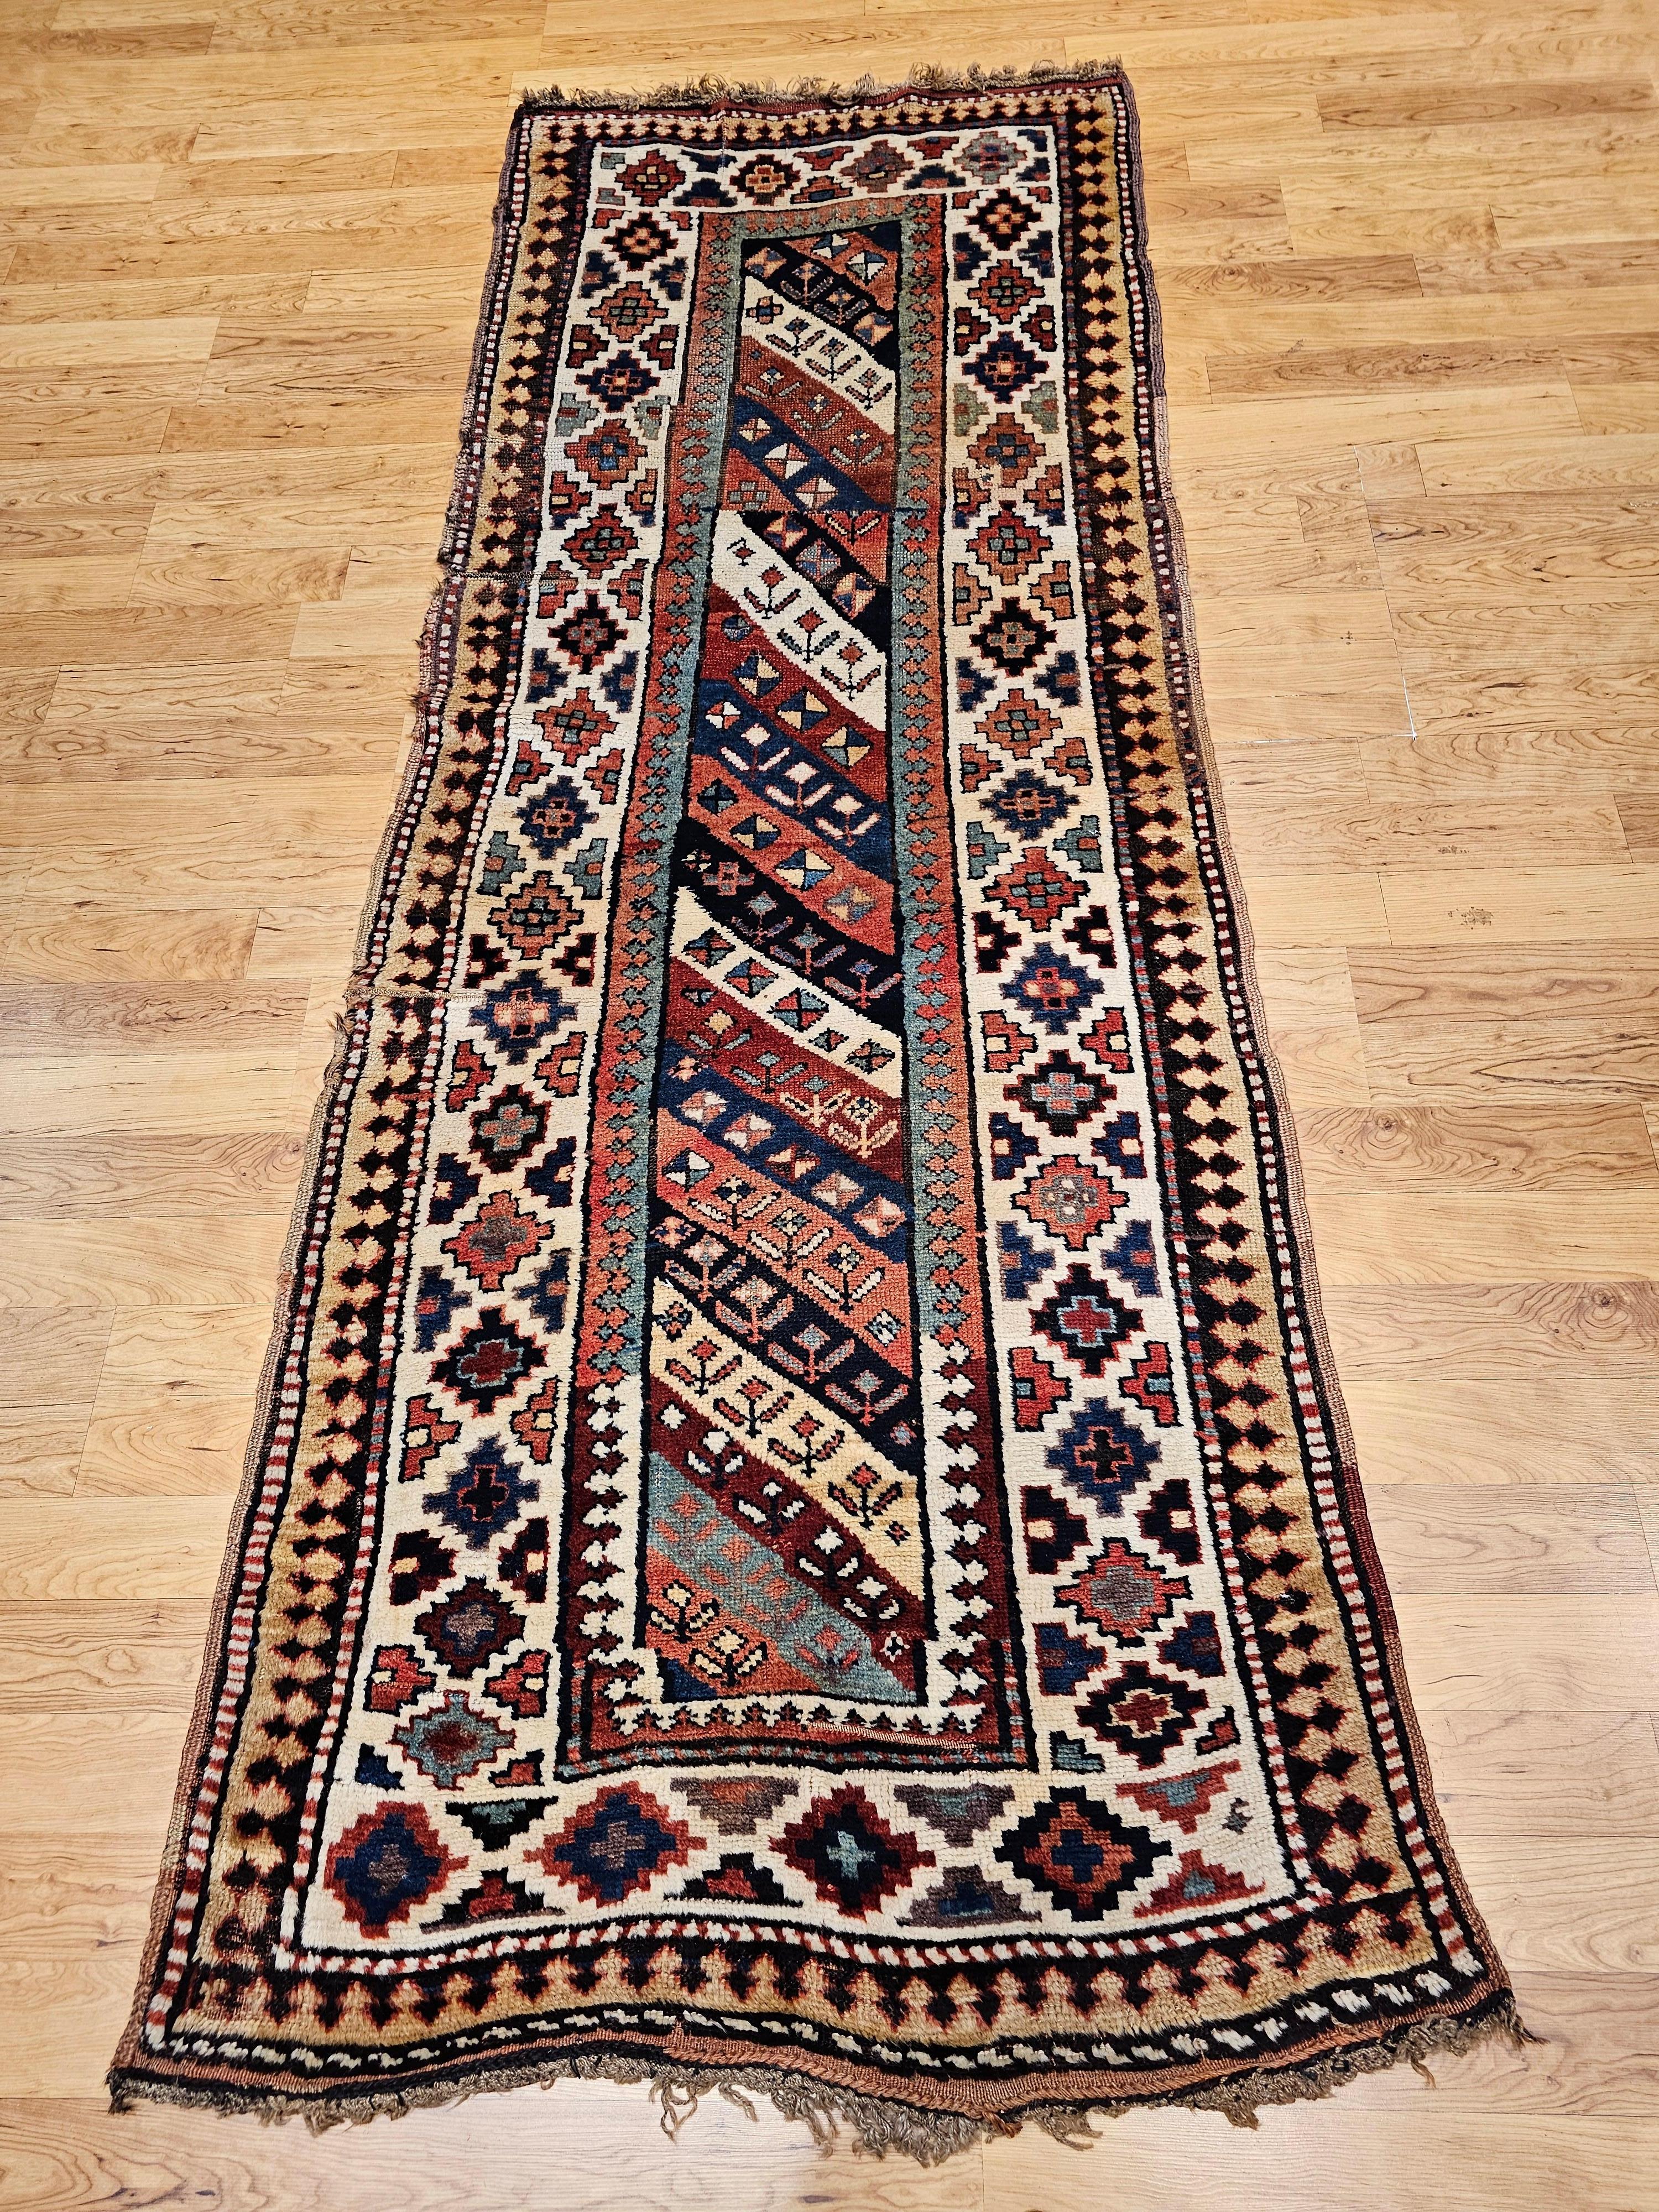 Beautiful and colorful vintage Caucasian Gendje Kazak runner from the late 1800s.   The Gendje runner is in an allover skewed stripe pattern with an alternating navy and ivory background with small geometric design.  The border is in ivory with star